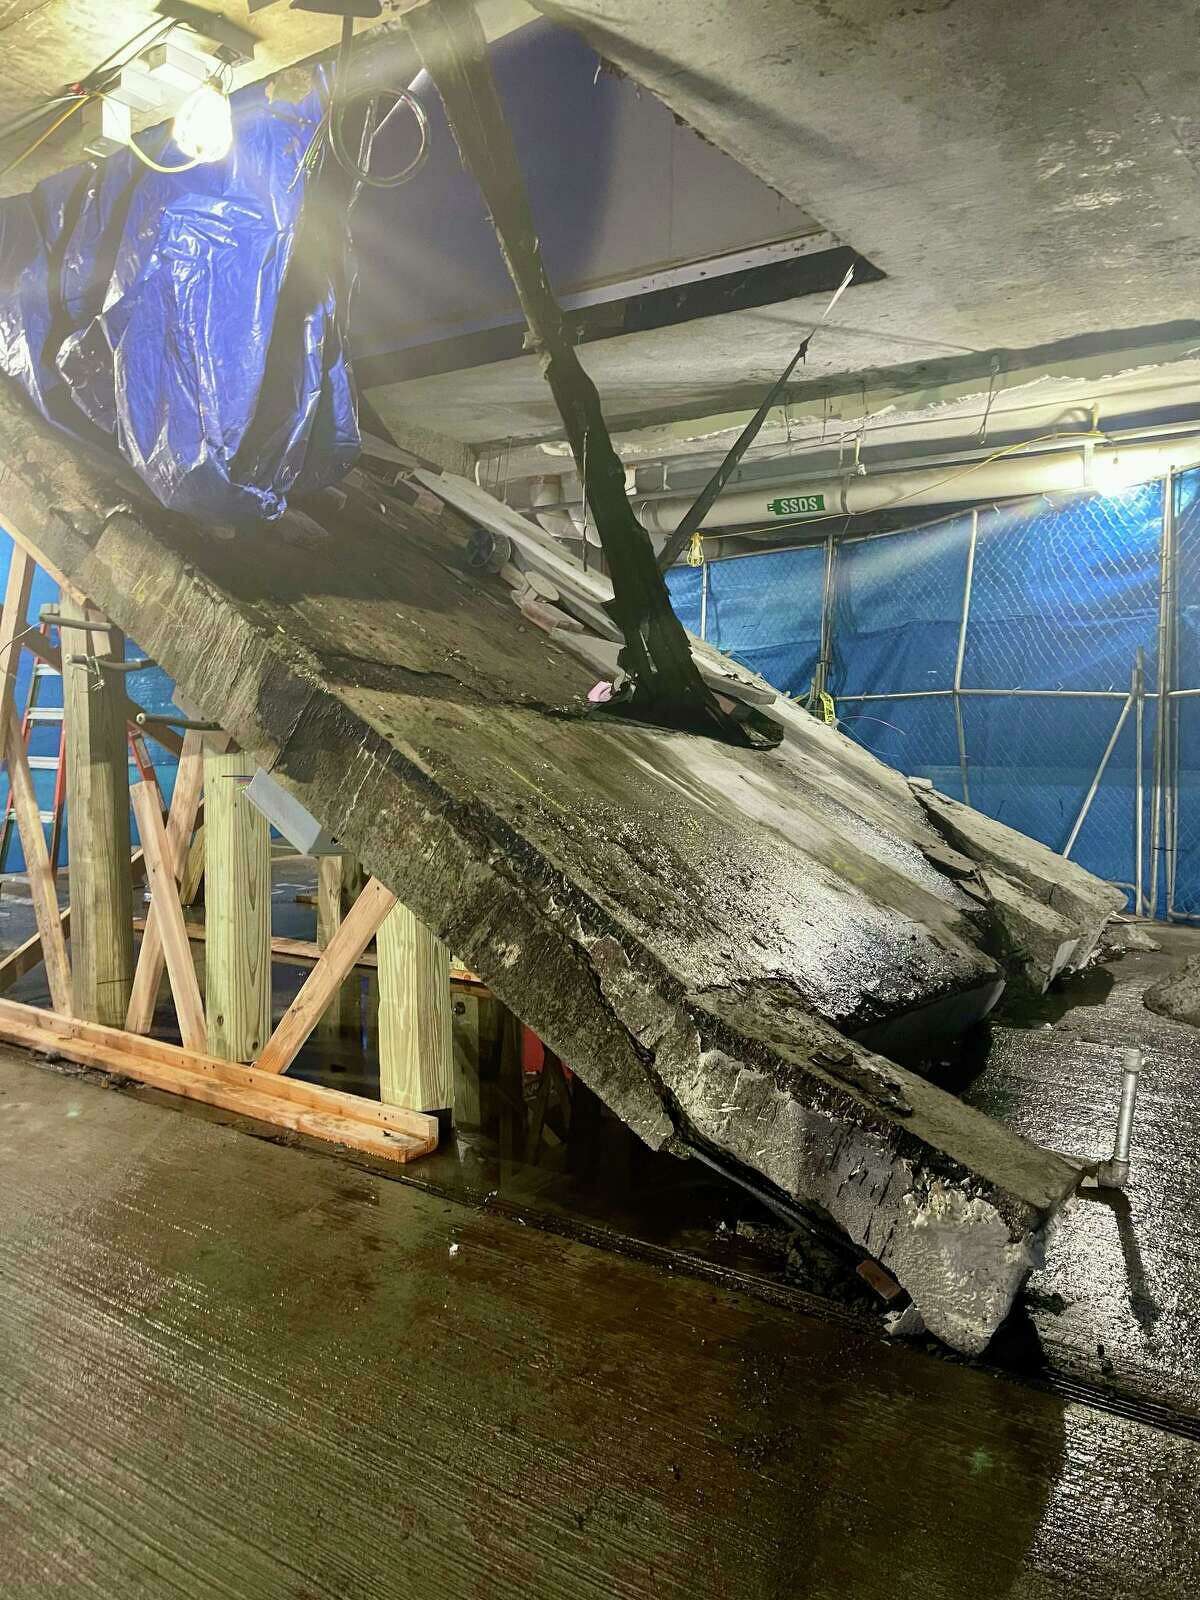 Part of an outdoor terrace collapsed into an indoor parking garage at Allure, a Stamford high-rise apartment complex, on Feb. 1, 2022.